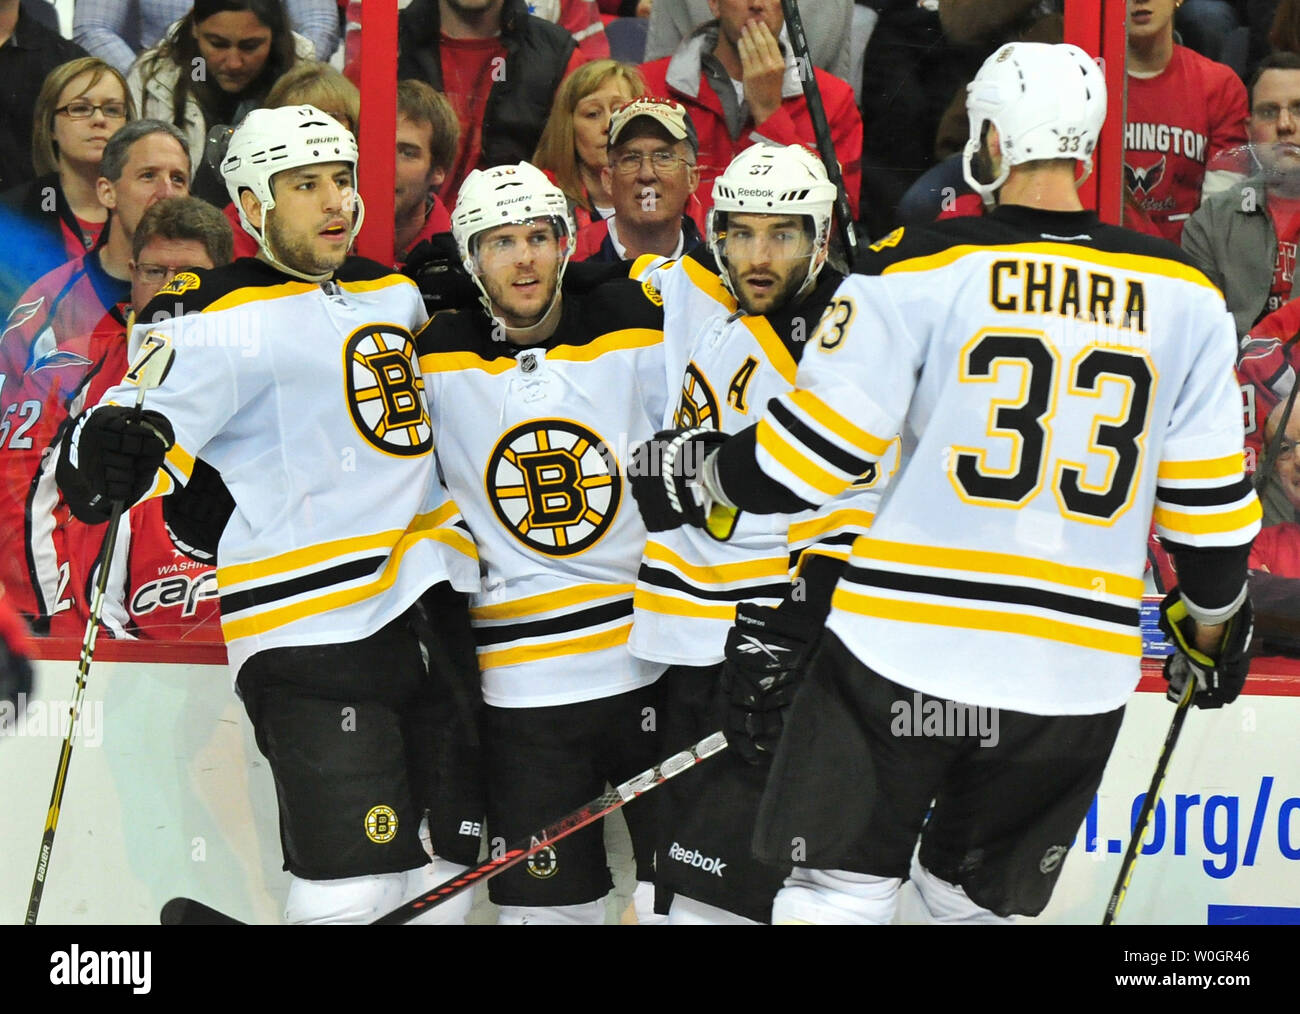 Tyler Seguin of the Boston Bruins and Team Chara poses prior to the News  Photo - Getty Images